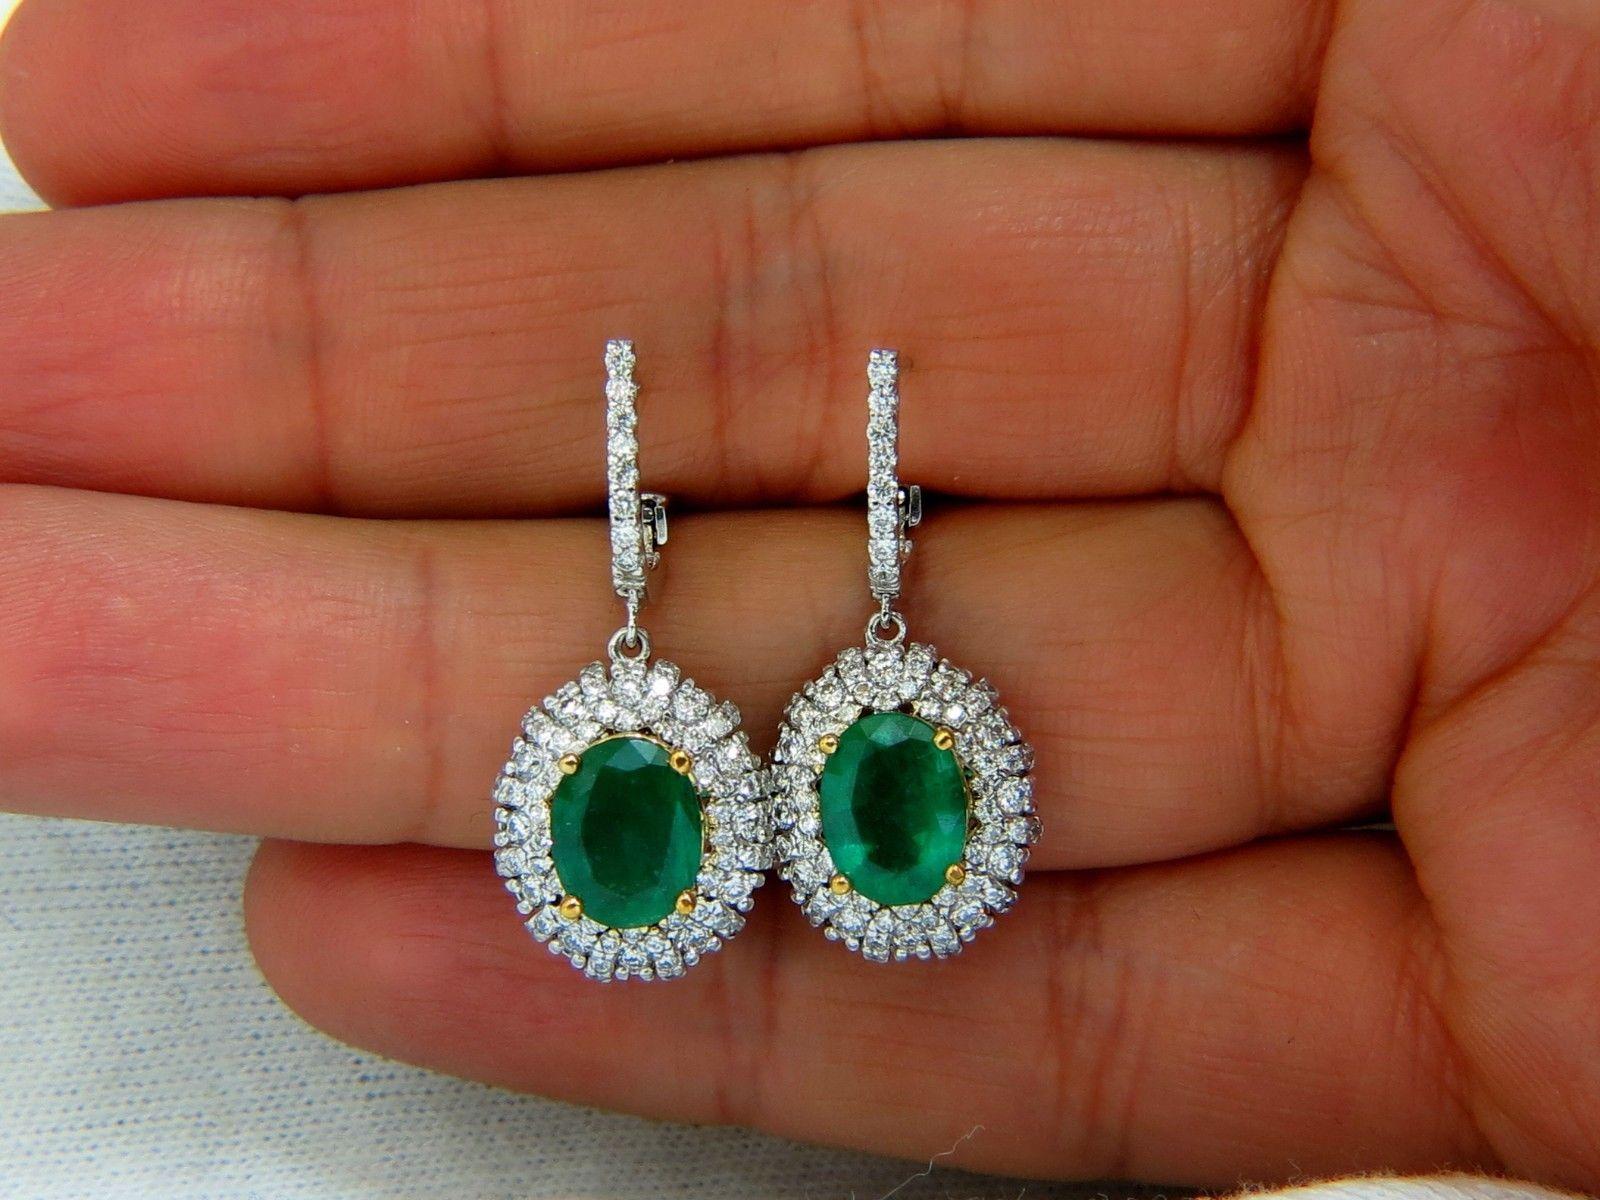 Modern Dangles.

3.44ct. Natural (2) Emeralds

Emeralds: Ovals brilliant cuts.

Transparent & Even Green tone.

Ranging: 9 X 7mm



1.40cts of round diamonds: 

G-color, Vs-2 clarity.

14kt. white gold

7.2 grams.

Earrings are .54 inch wide lower